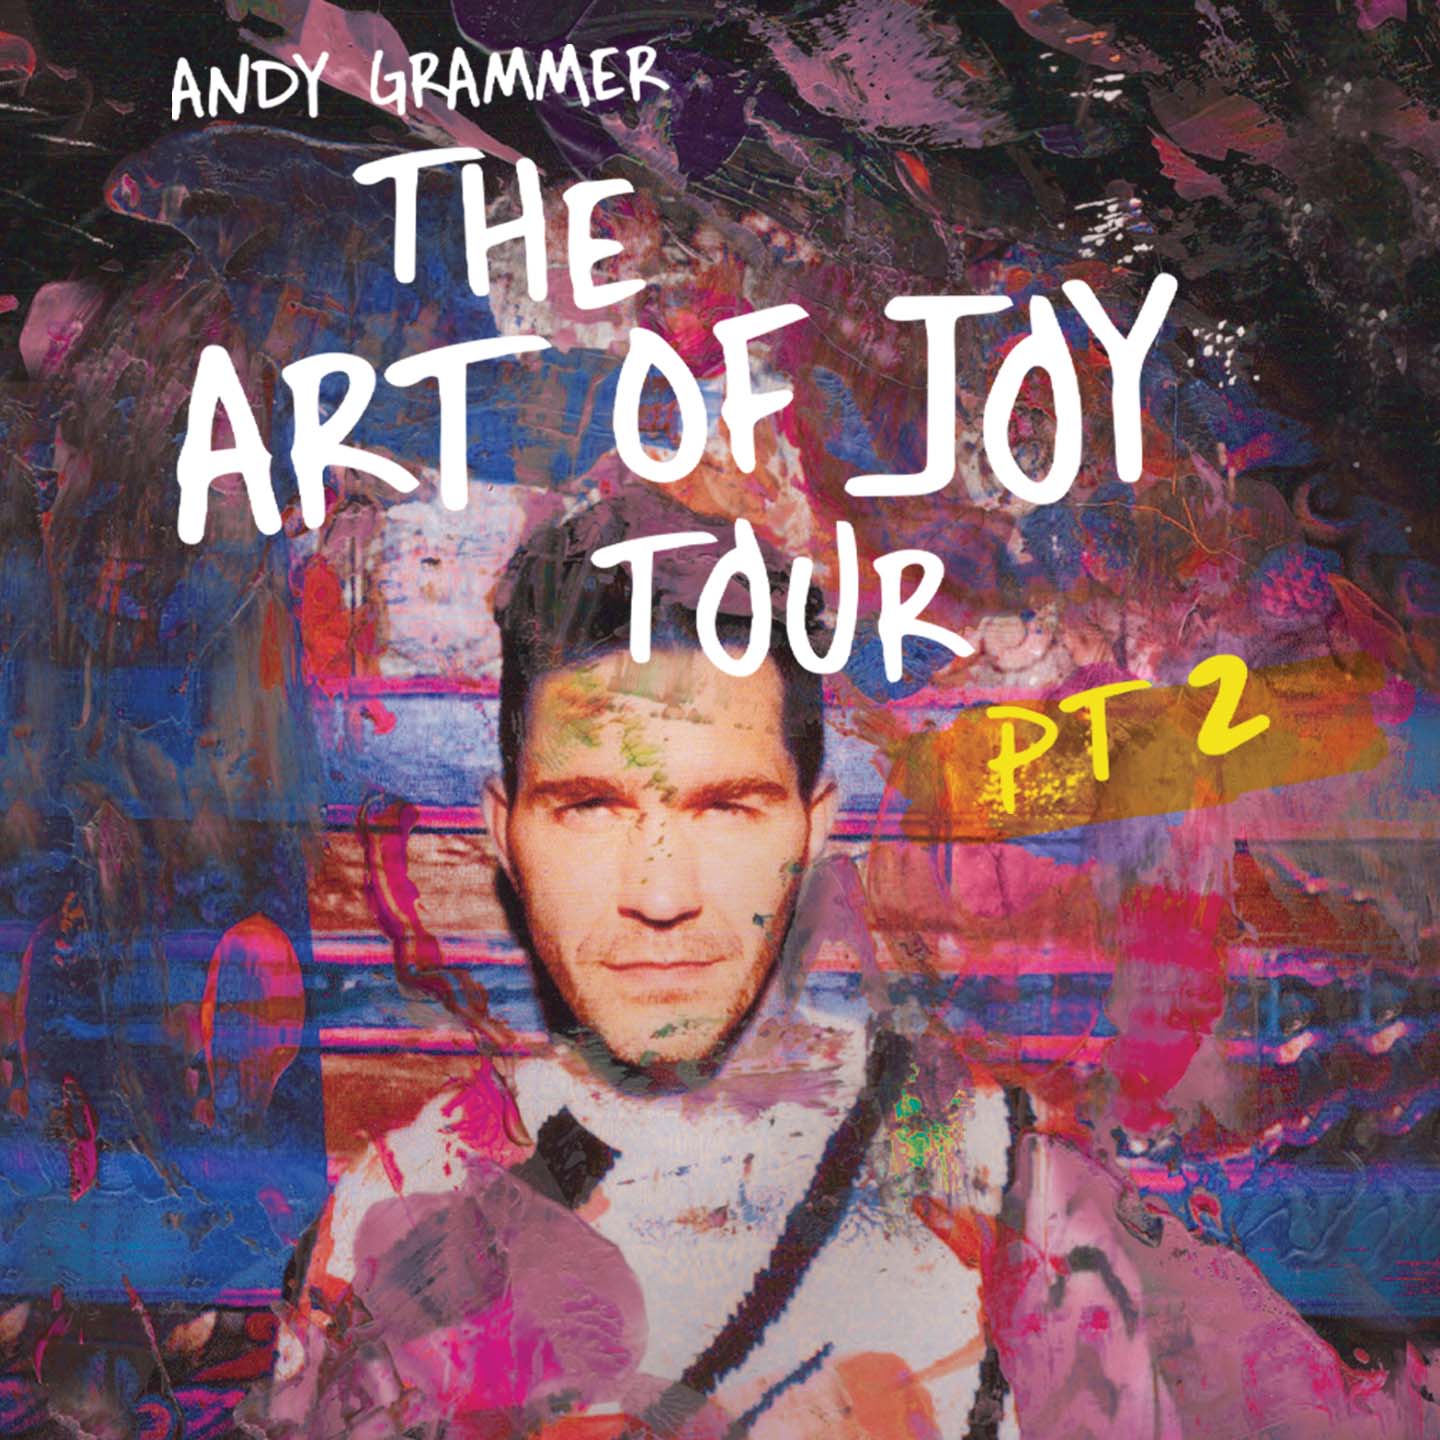 Andy Grammer – The Art of Joy Tour